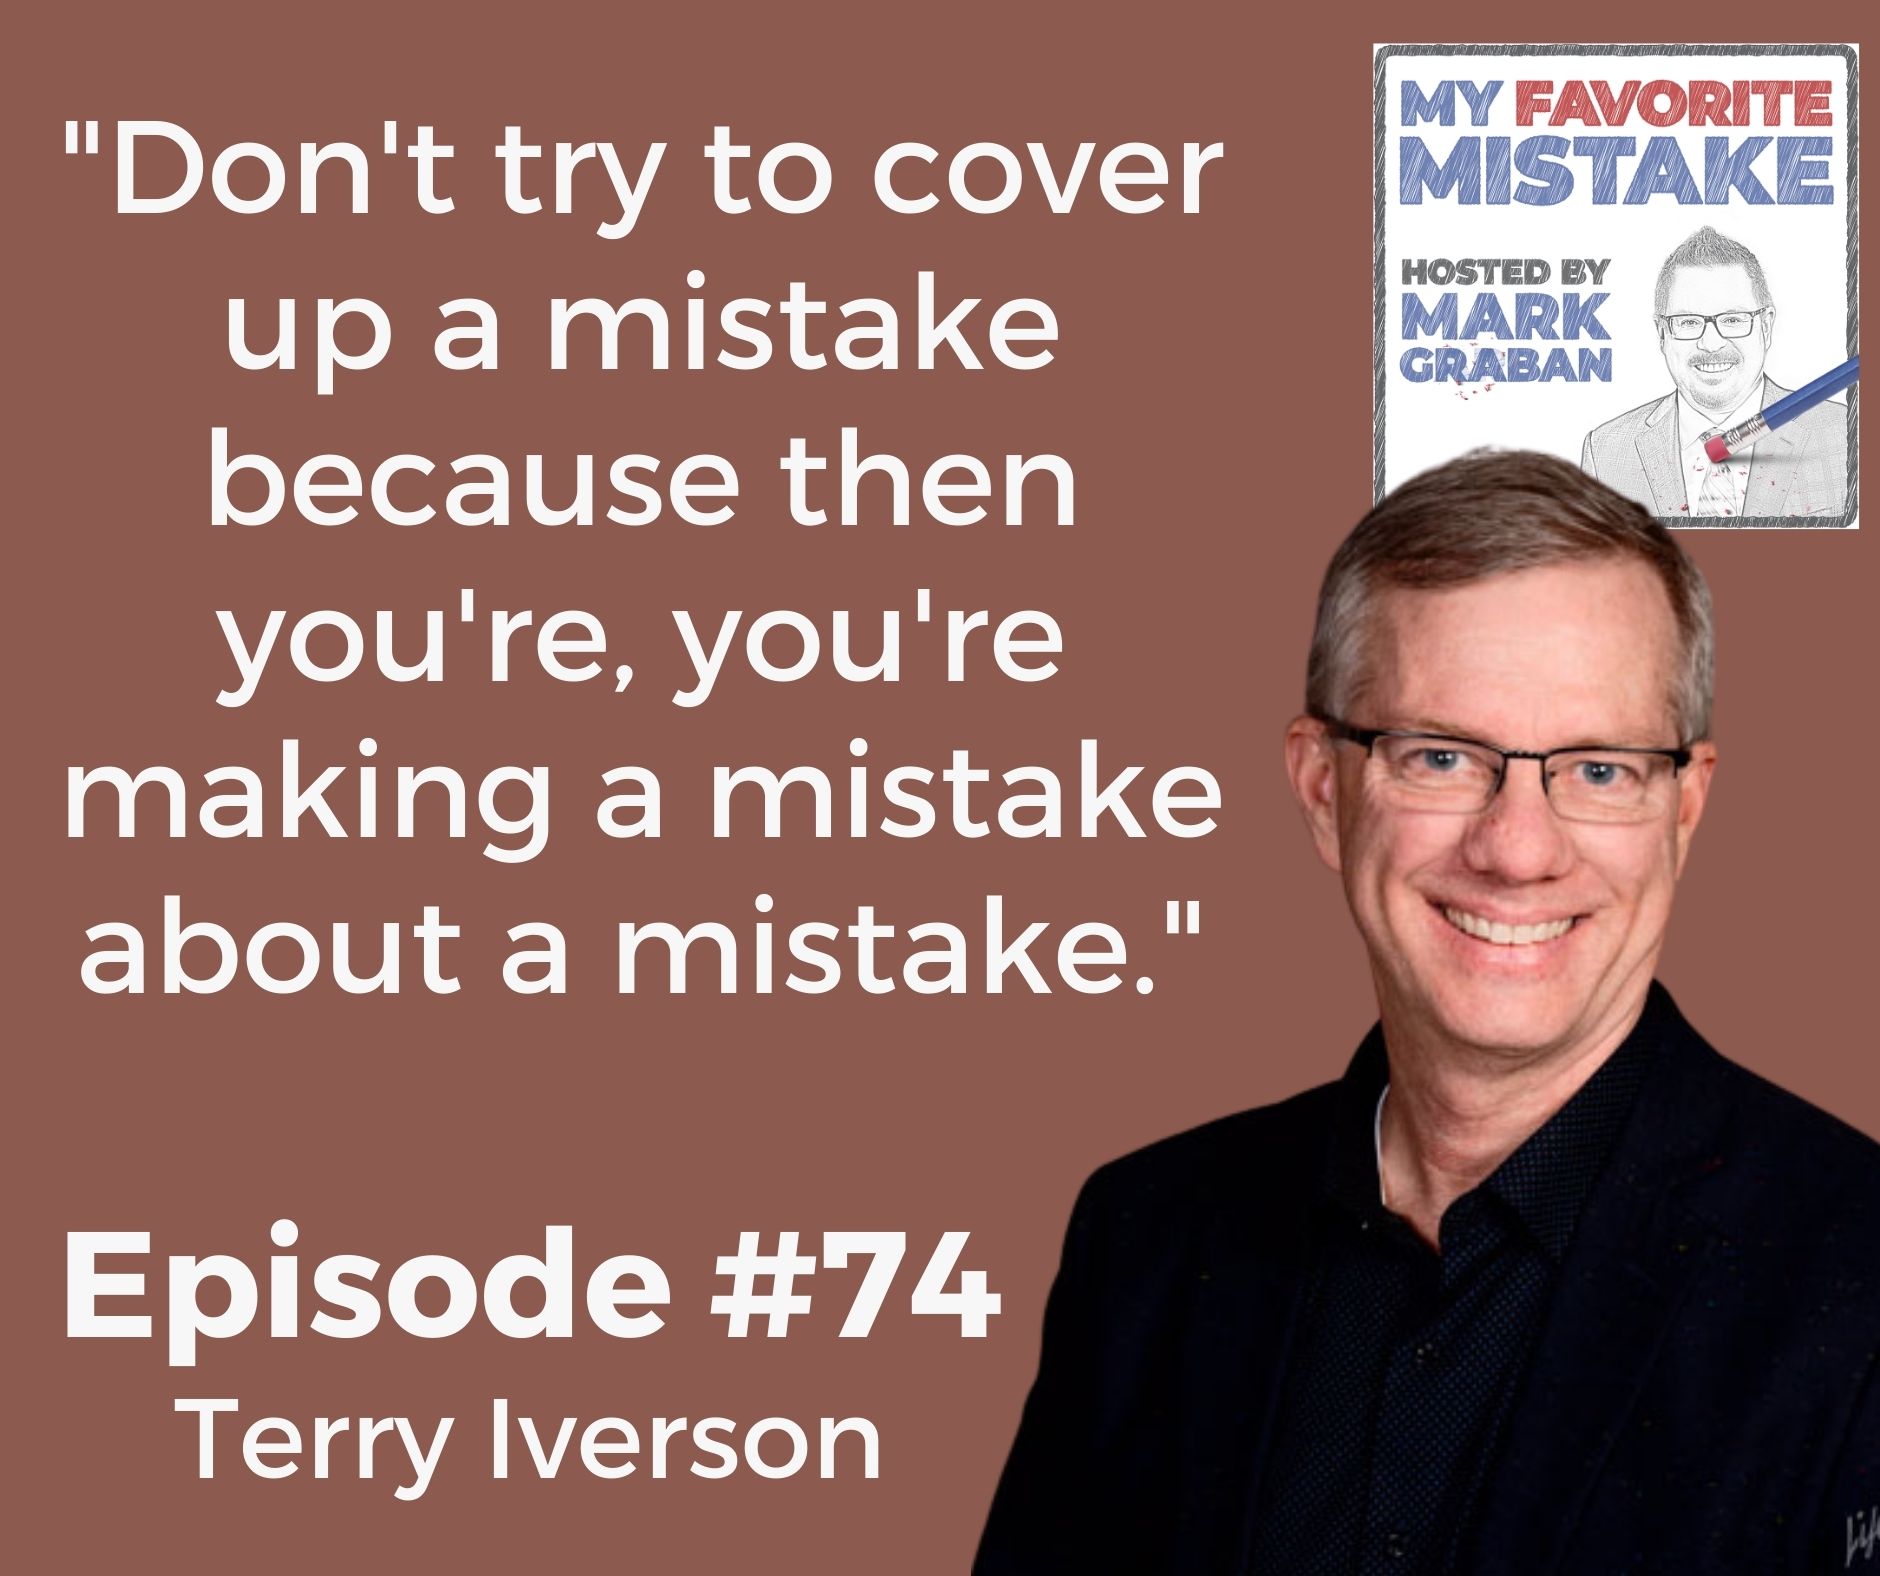 "Don't try to cover up a mistake because then you're, you're making a mistake about a mistake."